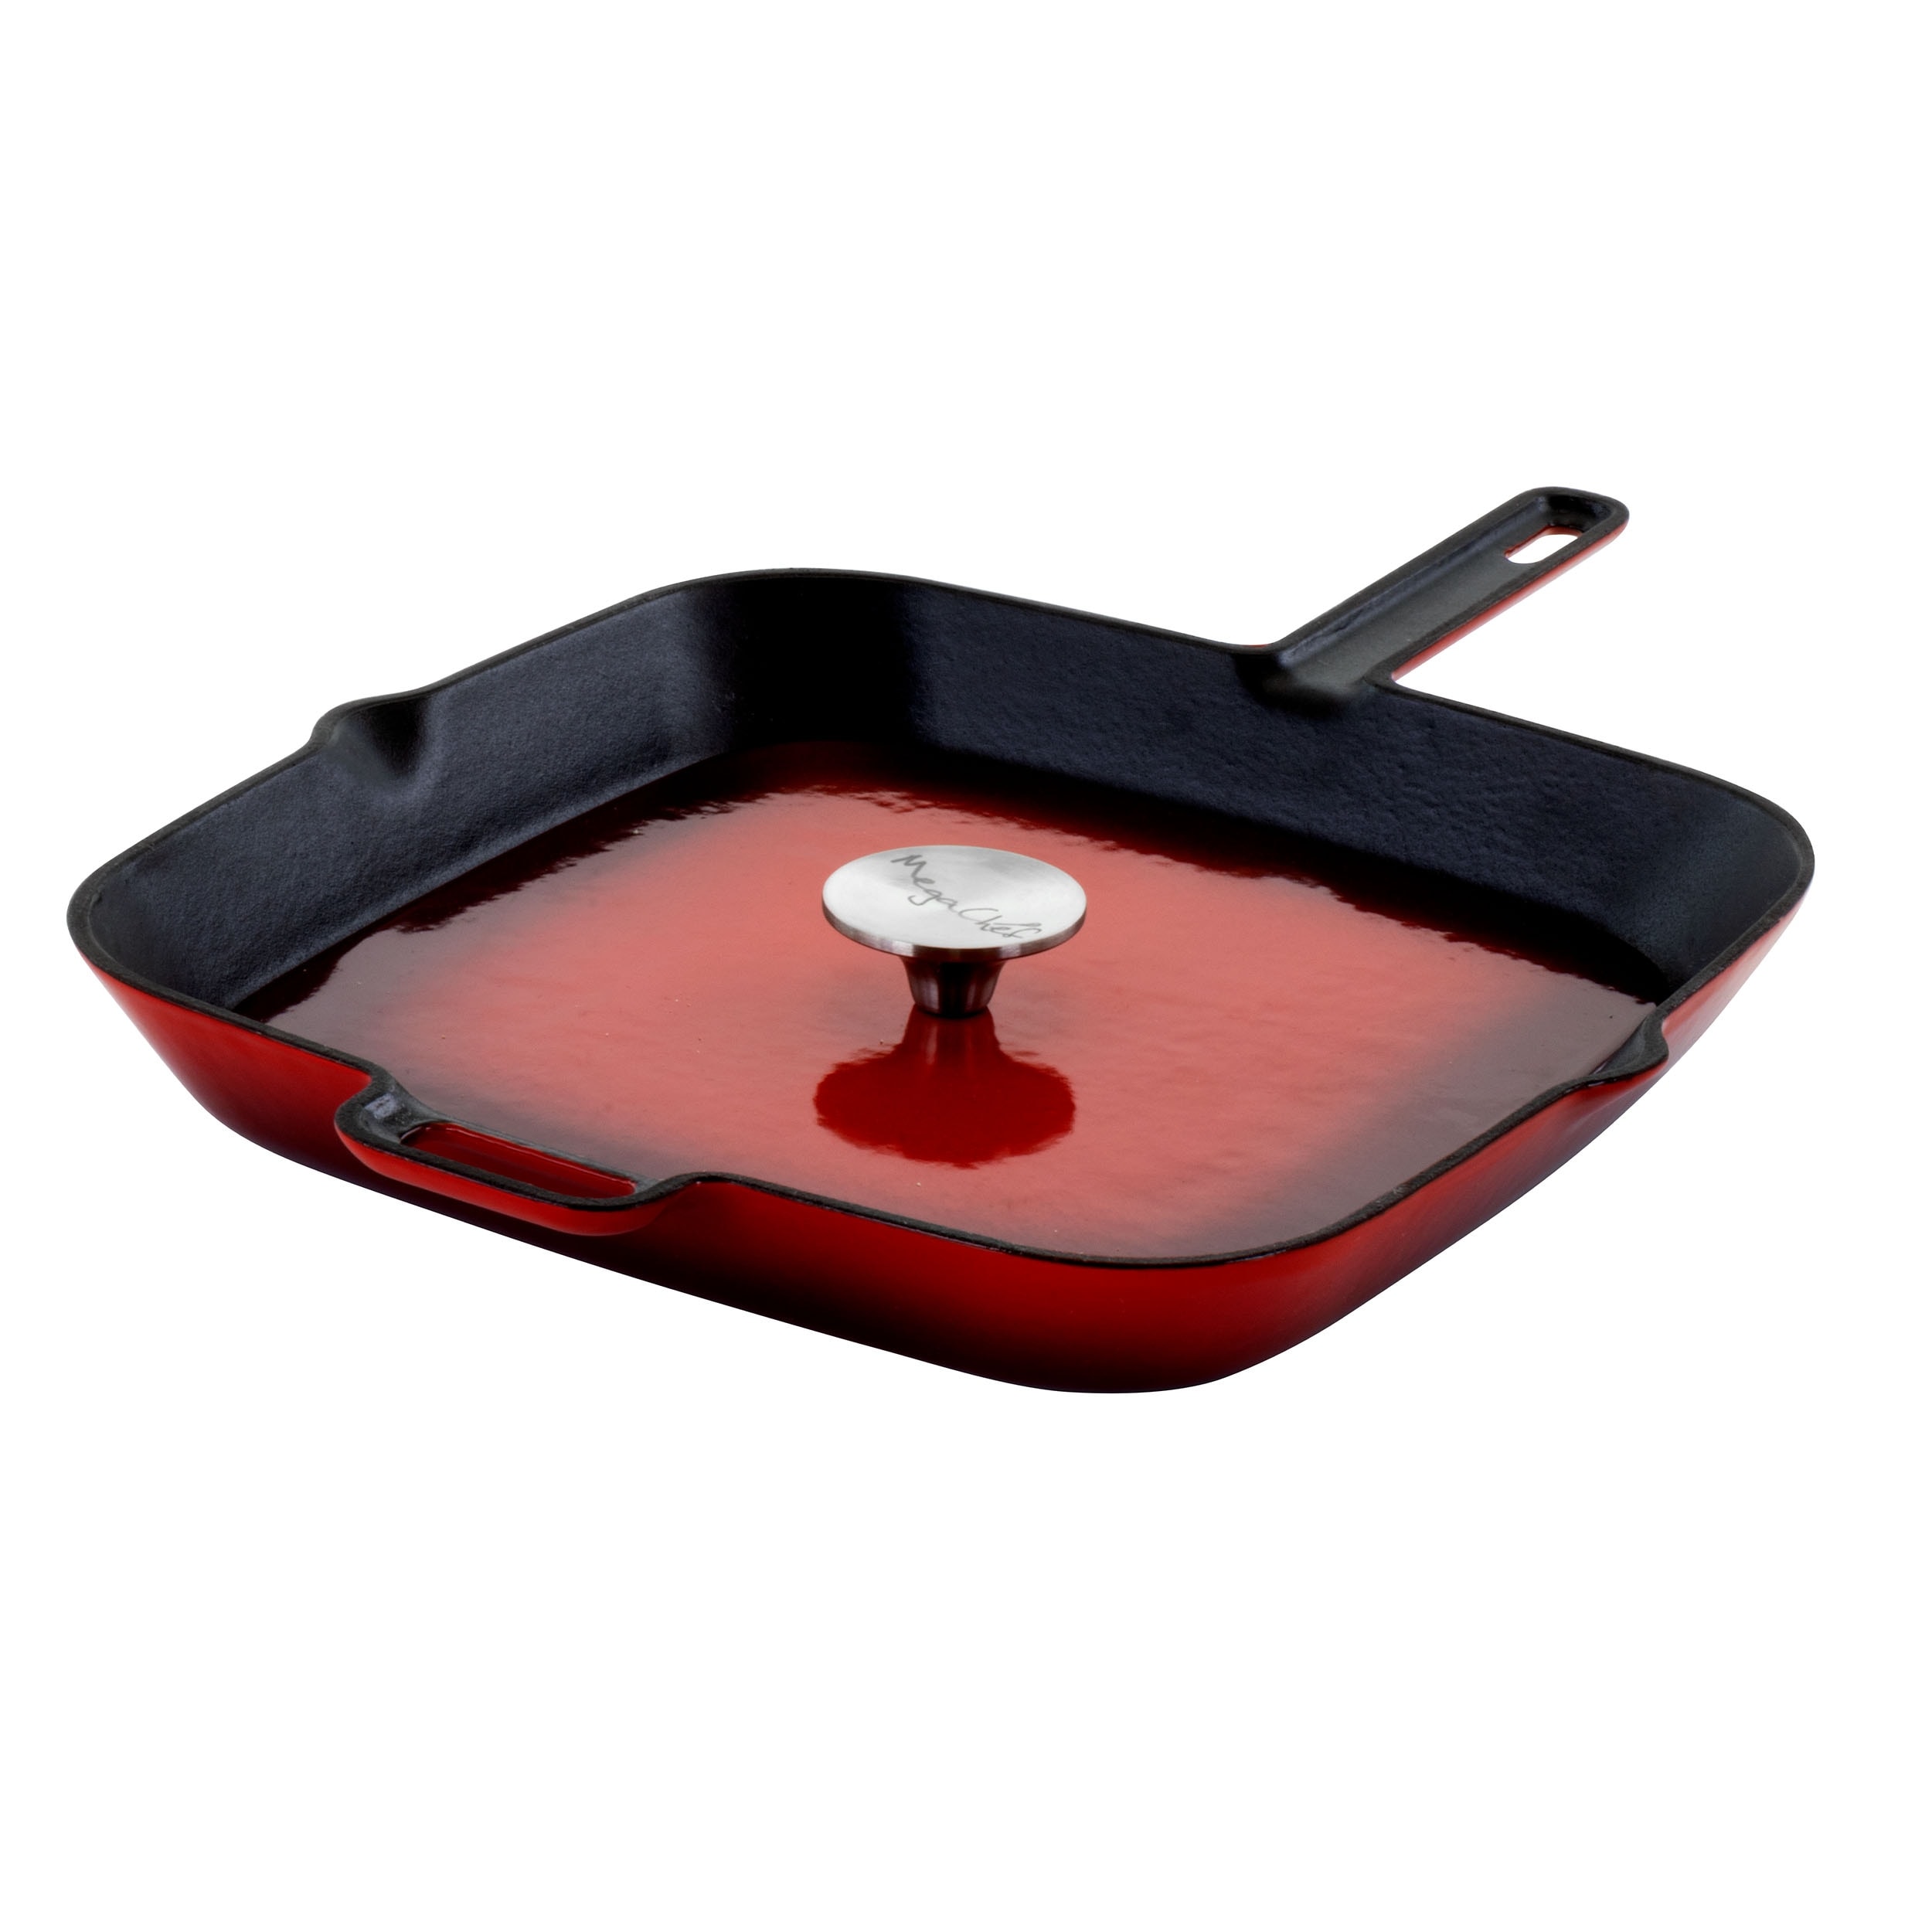 https://ak1.ostkcdn.com/images/products/is/images/direct/aad941fc22a9b8377144647969ca6f7b3eb77bba/MegaChef-11-Inch-Square-Enamel-Cast-Iron-Grill-Pan-with-Matching-Grill-Press-in-Red-with-Press.jpg